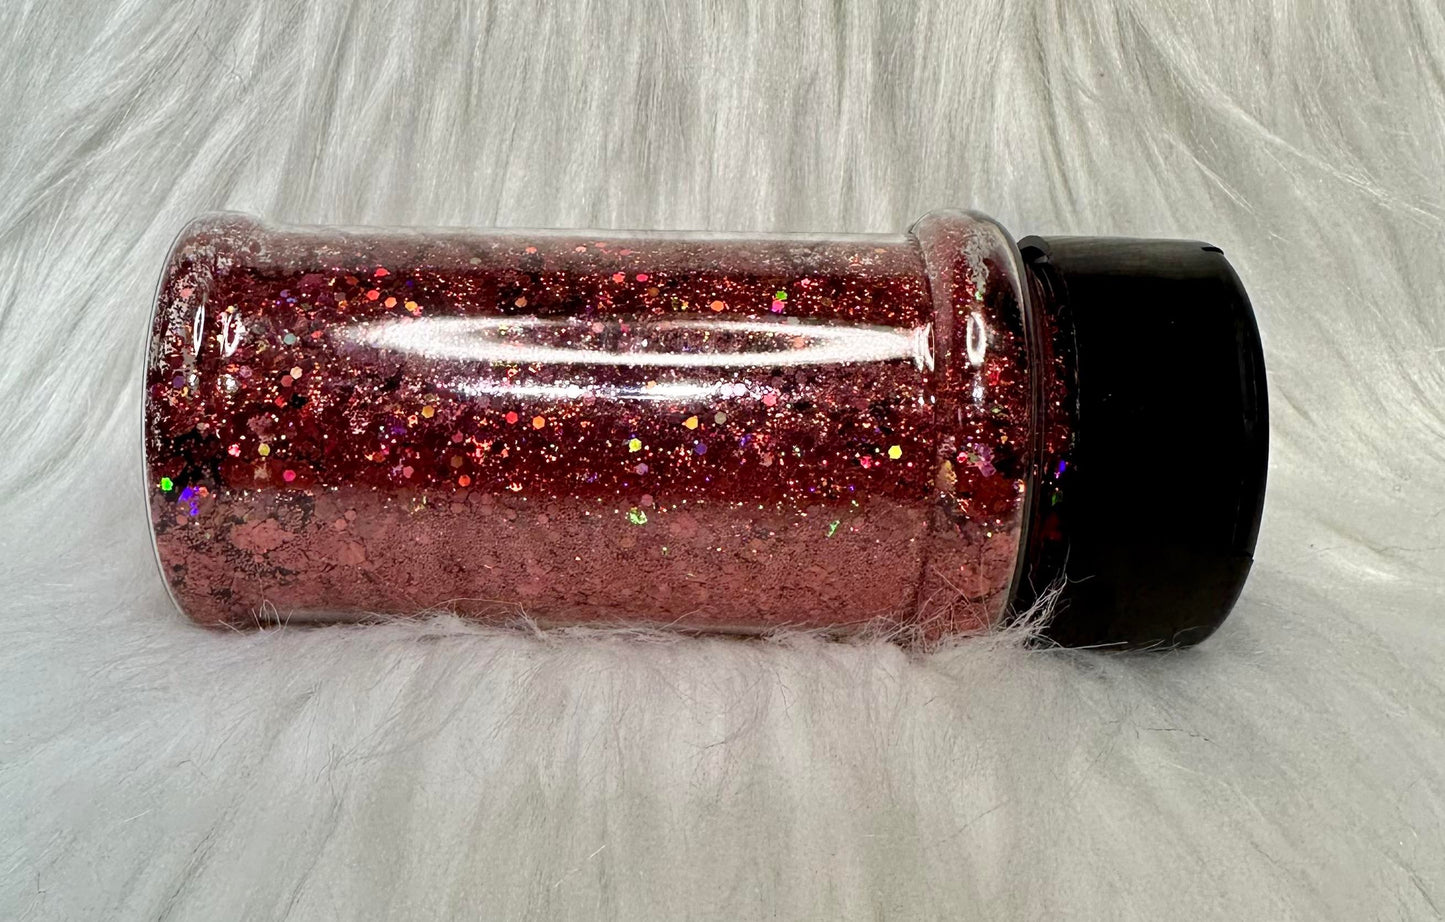 Marooned Holographic Chunky Mix Glitter